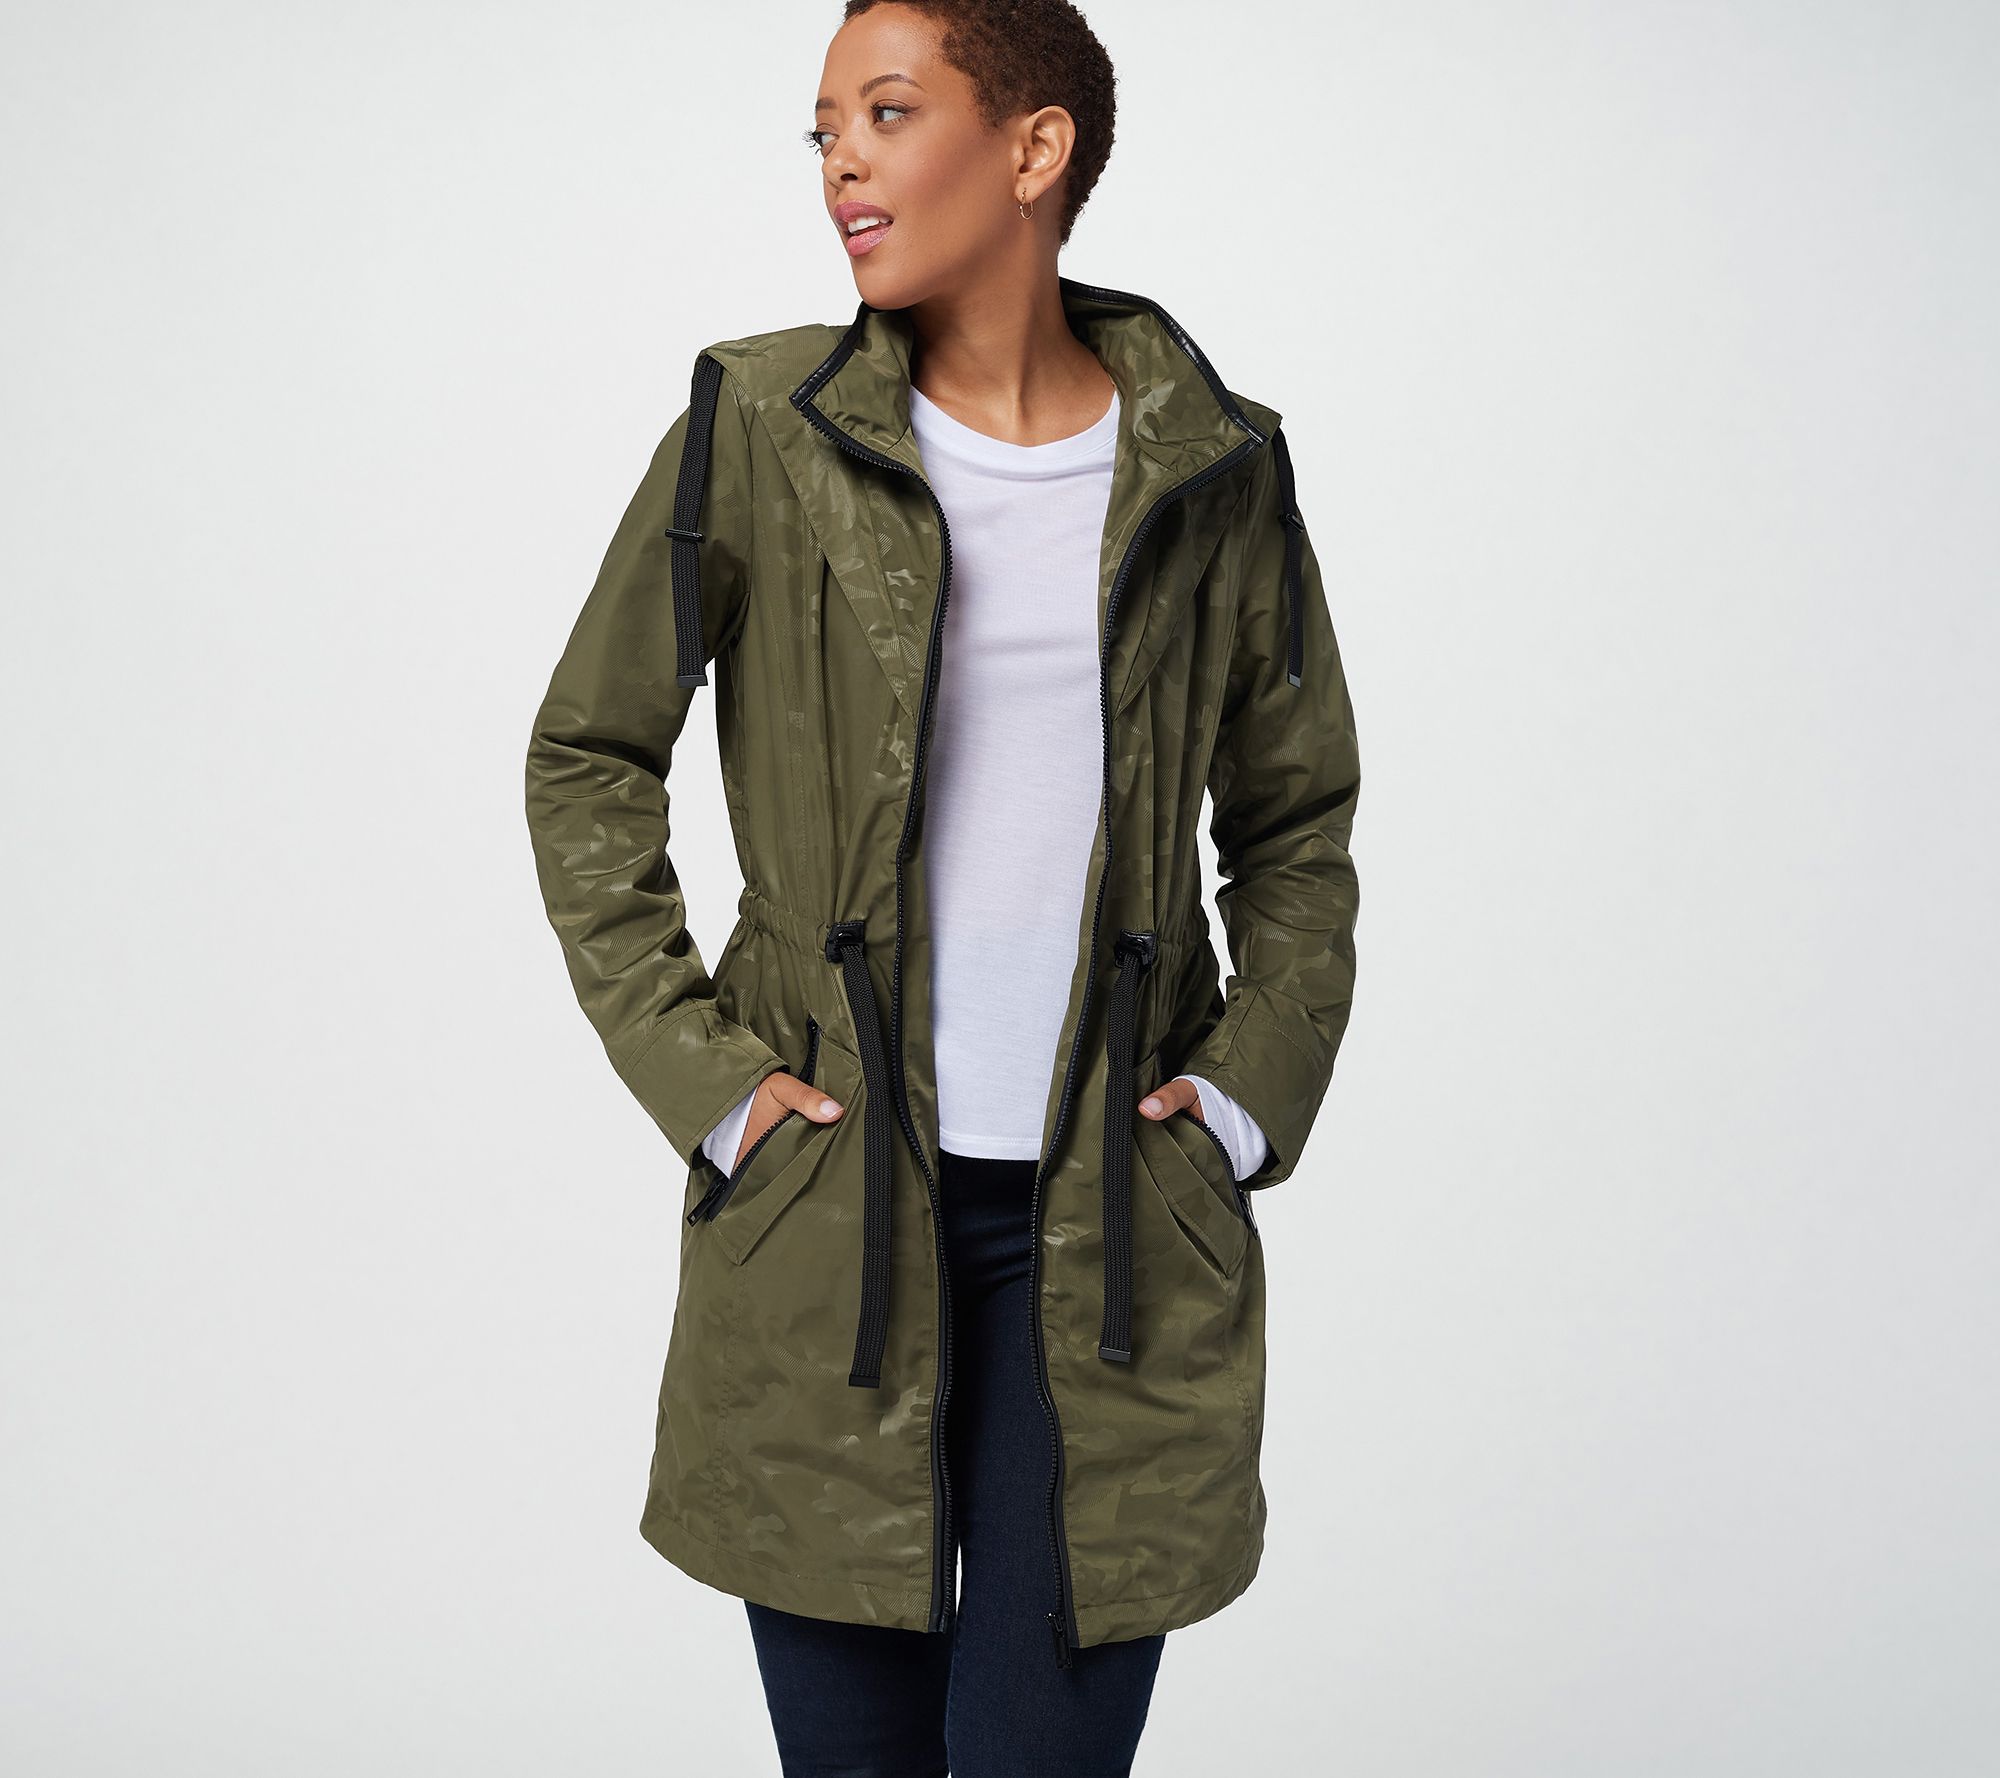 Centigrade Anorak Jacket with Cinched Waist - QVC.com